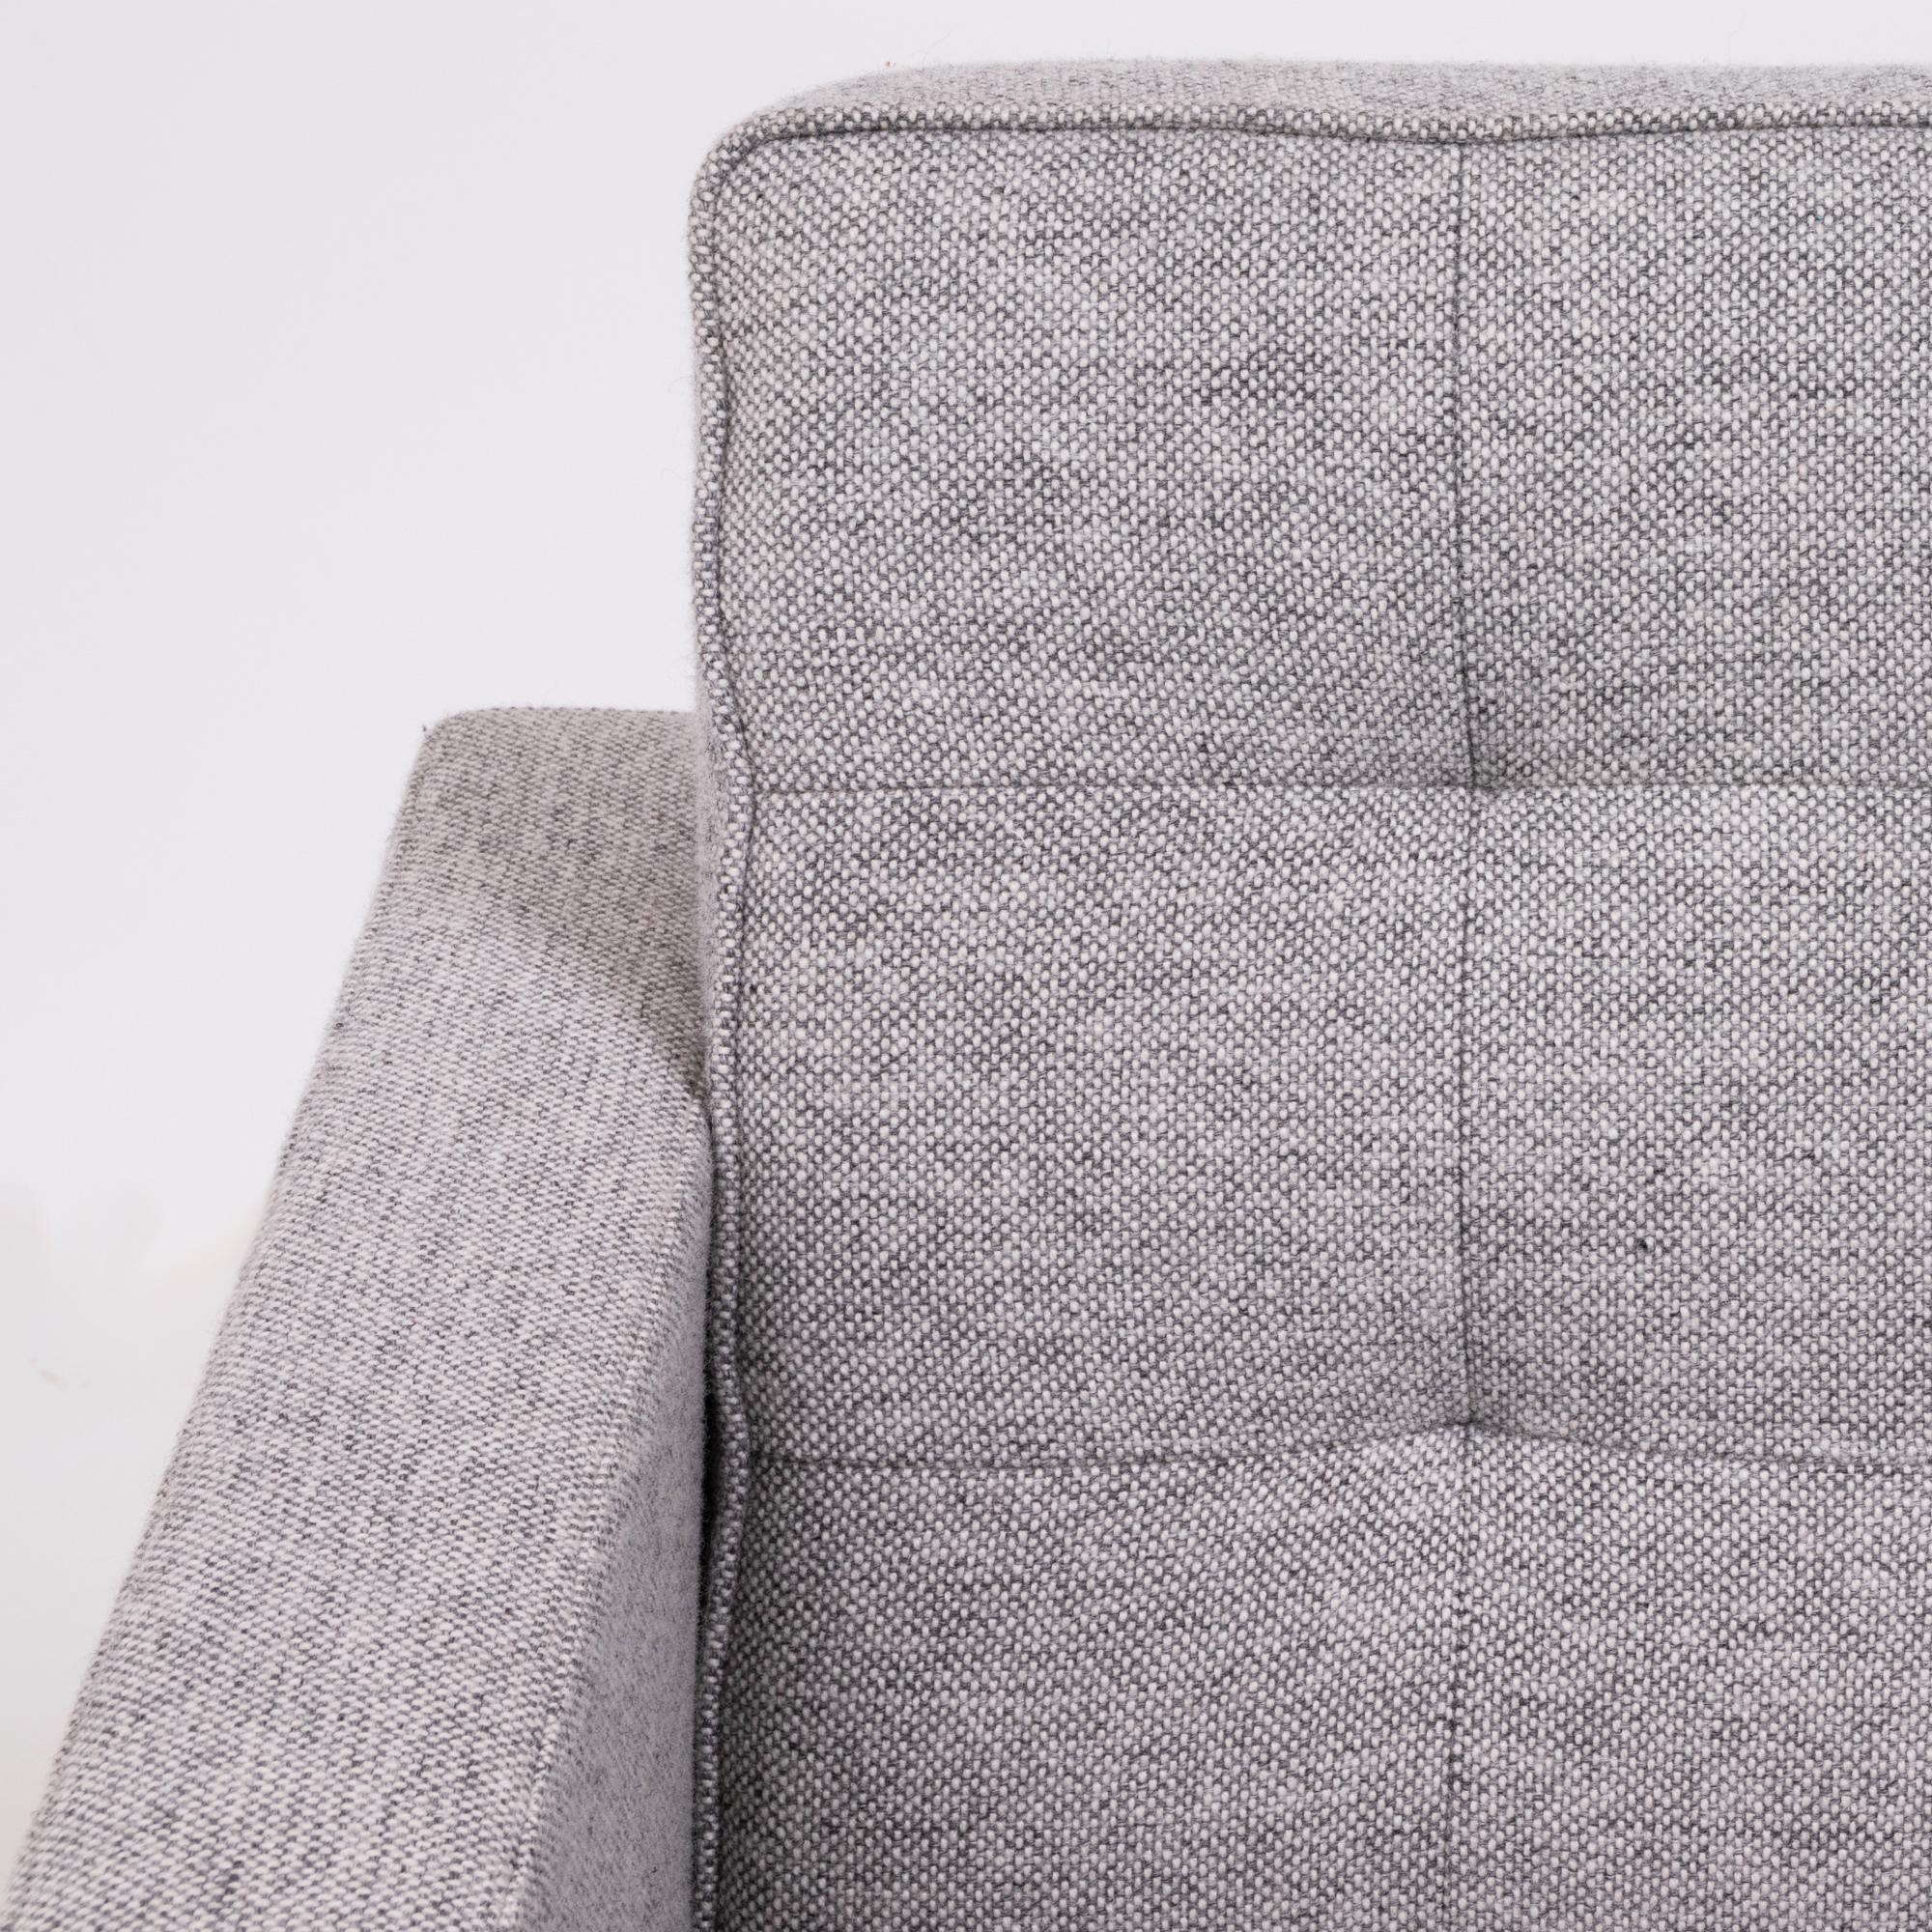 Florence Knoll Grey Tuxedo Lounge Chair For Sale 4